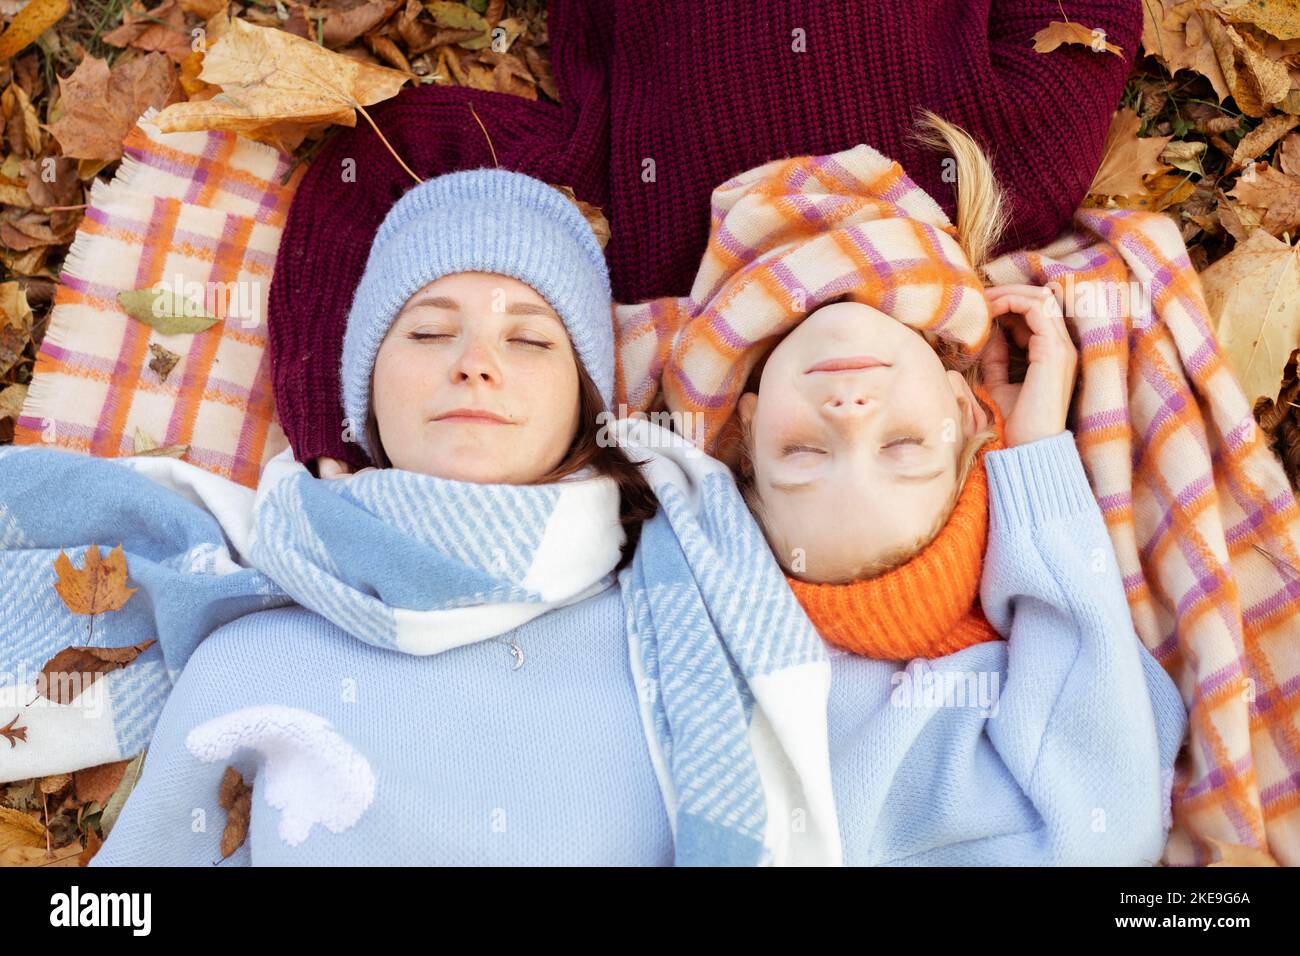 Calm, glad young mother and little daughter with close eyes in warm blue and orange outfits with hats lying on foliage Stock Photo